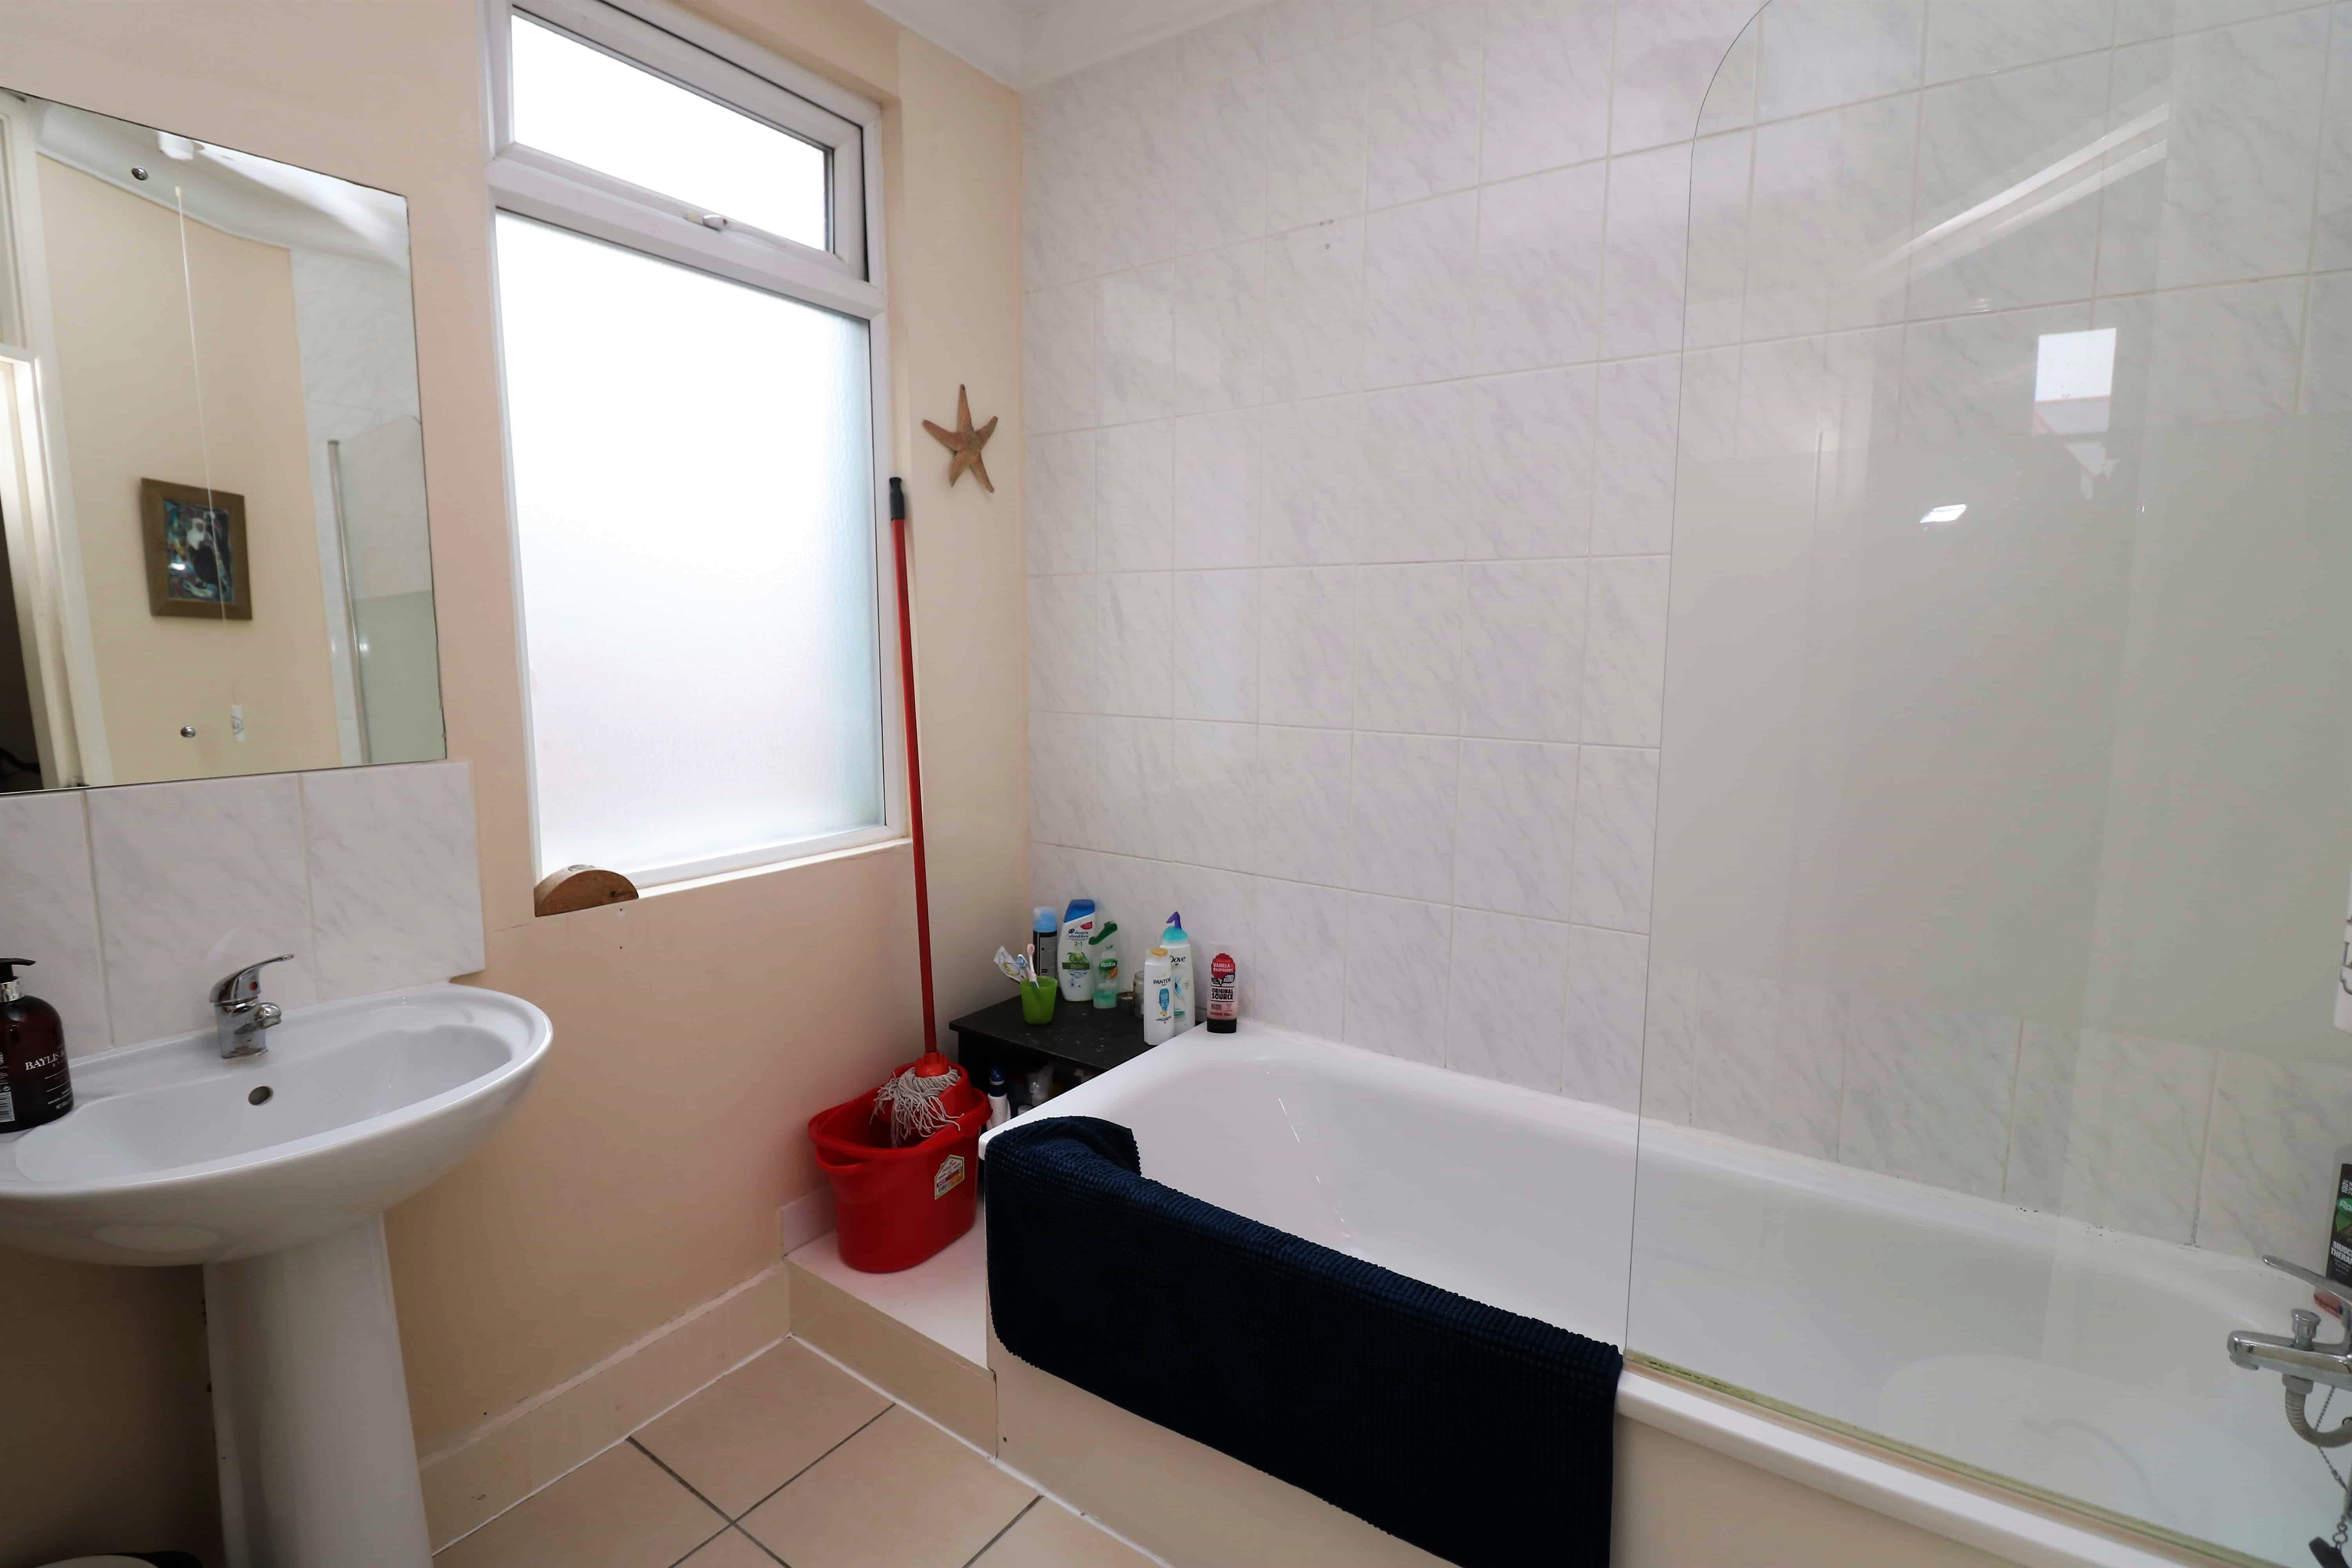 Top floor two bedroom flat on the ladder, N8. Spacious living room and kitchen.